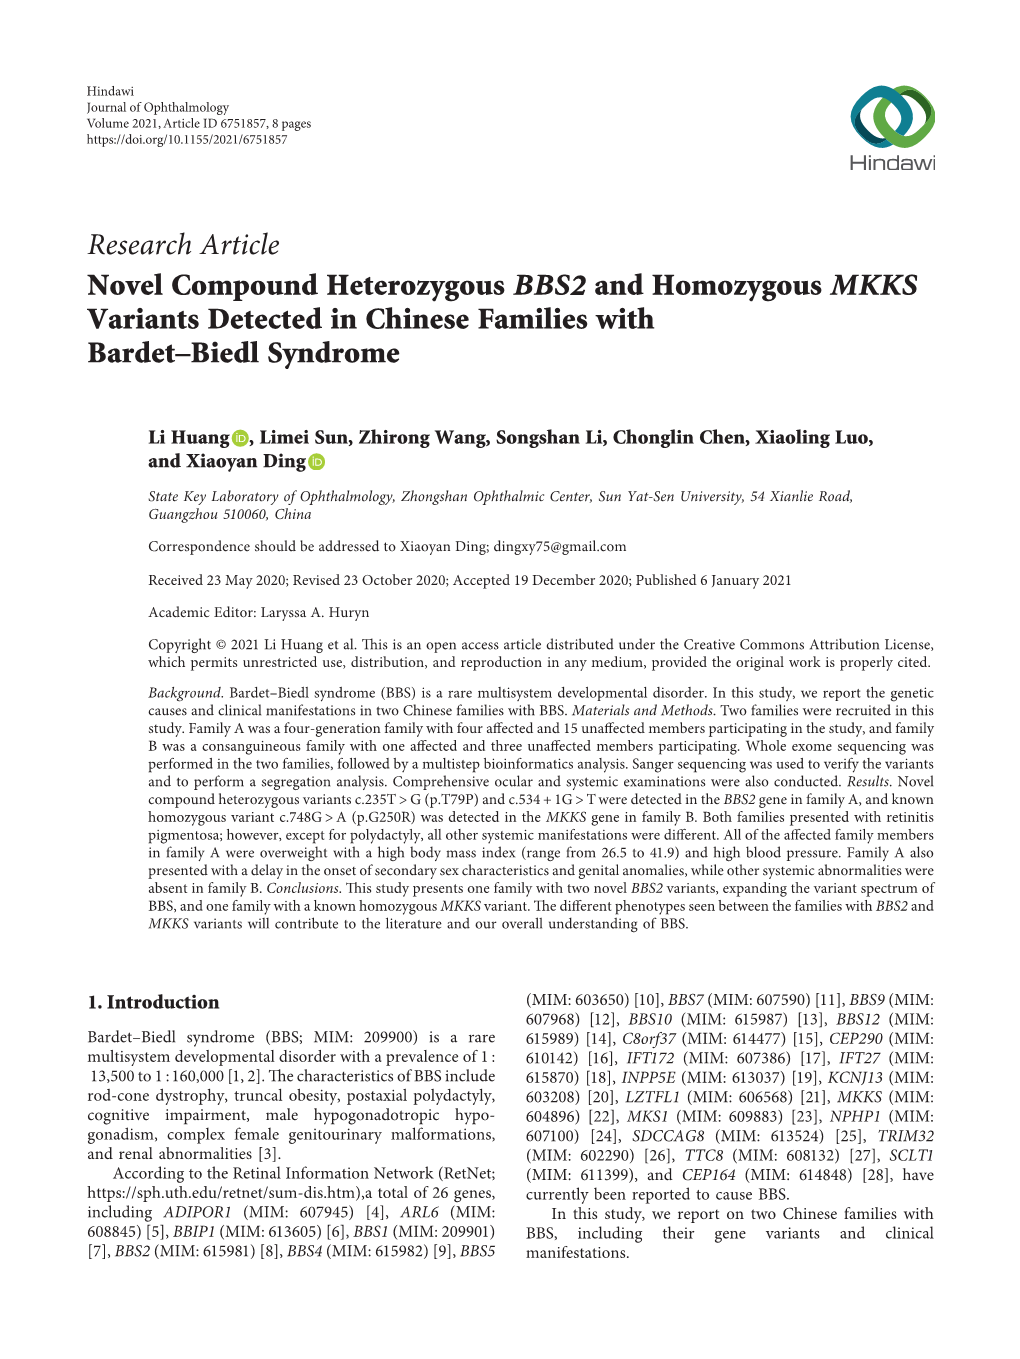 Novel Compound Heterozygous BBS2 and Homozygous MKKS Variants Detected in Chinese Families with Bardet–Biedl Syndrome